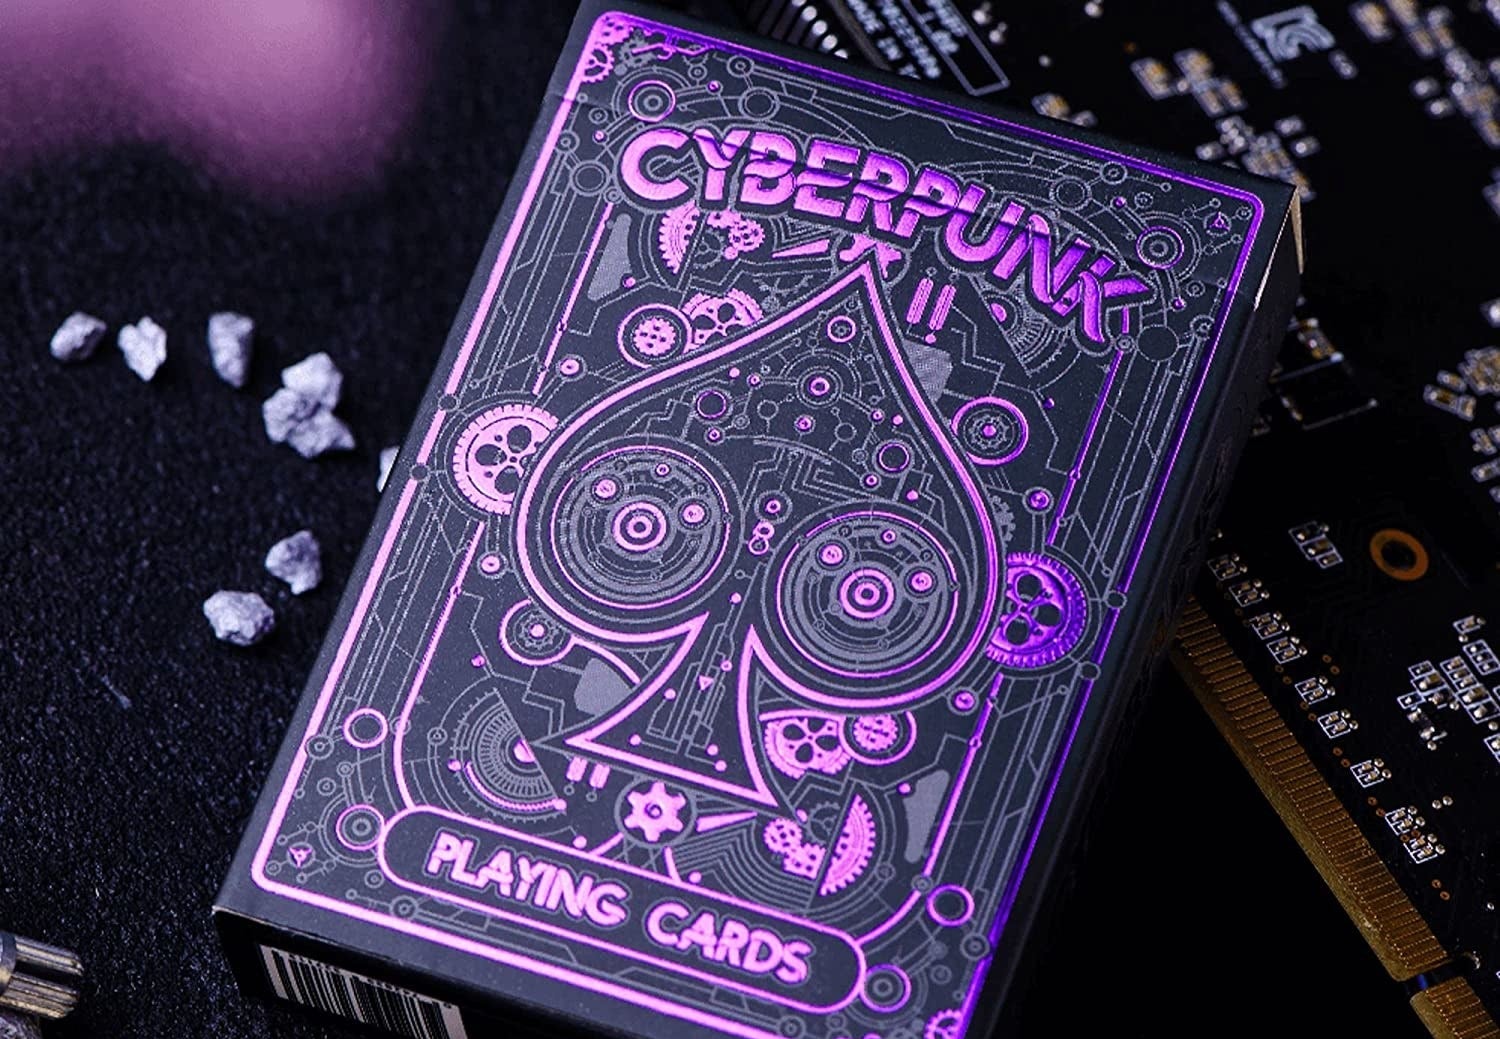 a deck of cards with a purple cyberpunk design on it